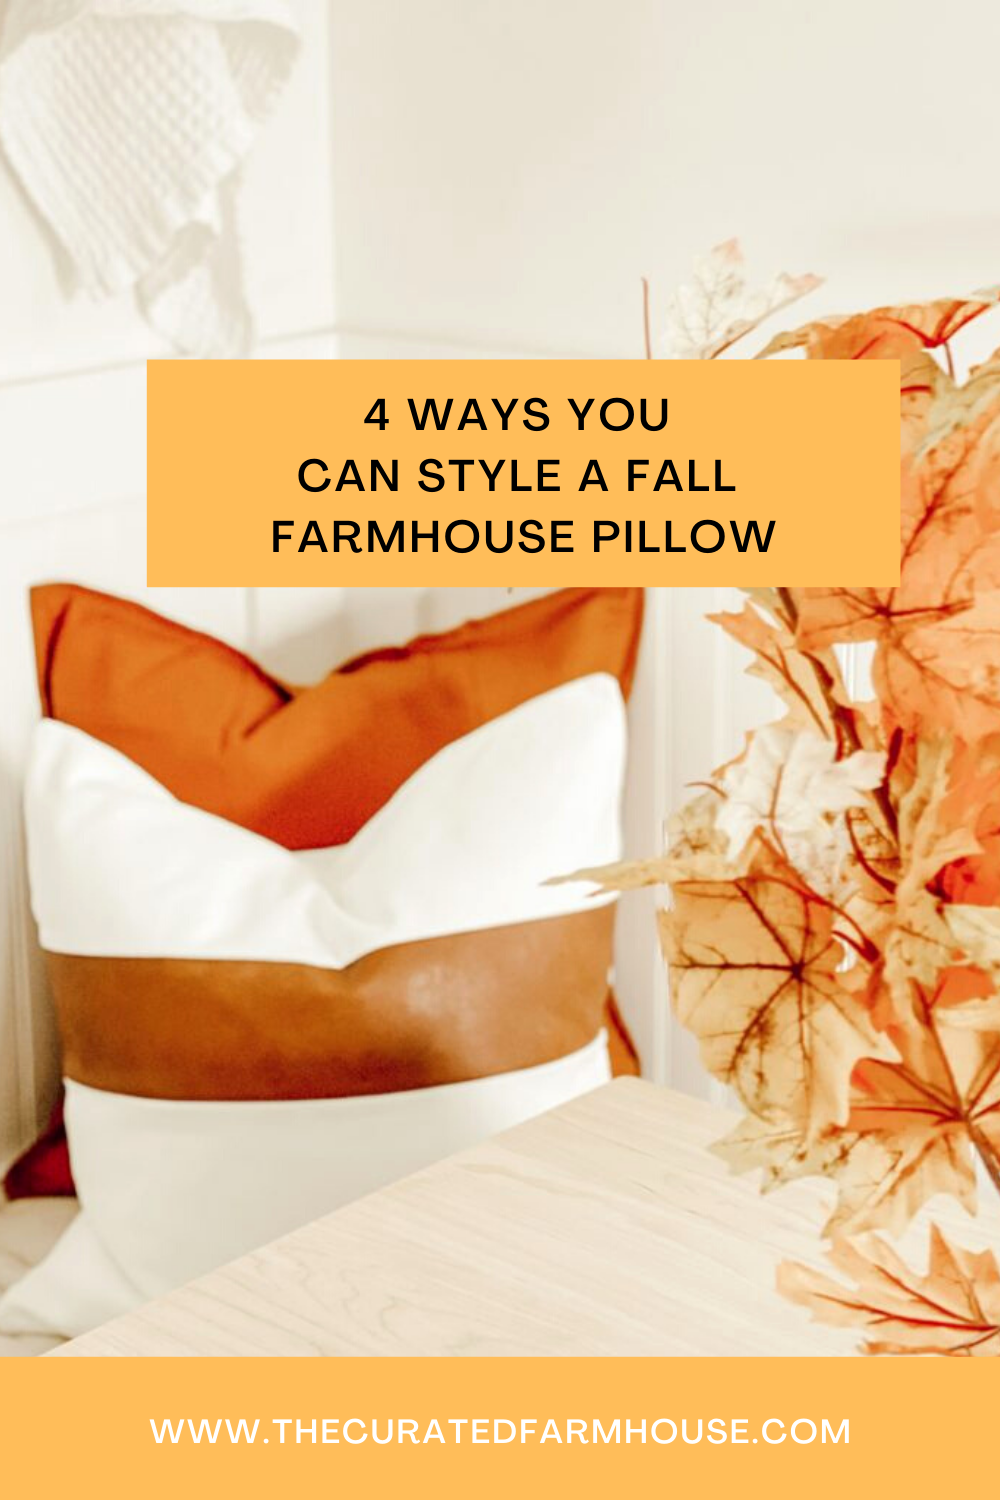 4 Ways You Can Style A Fall Farmhouse Pillow